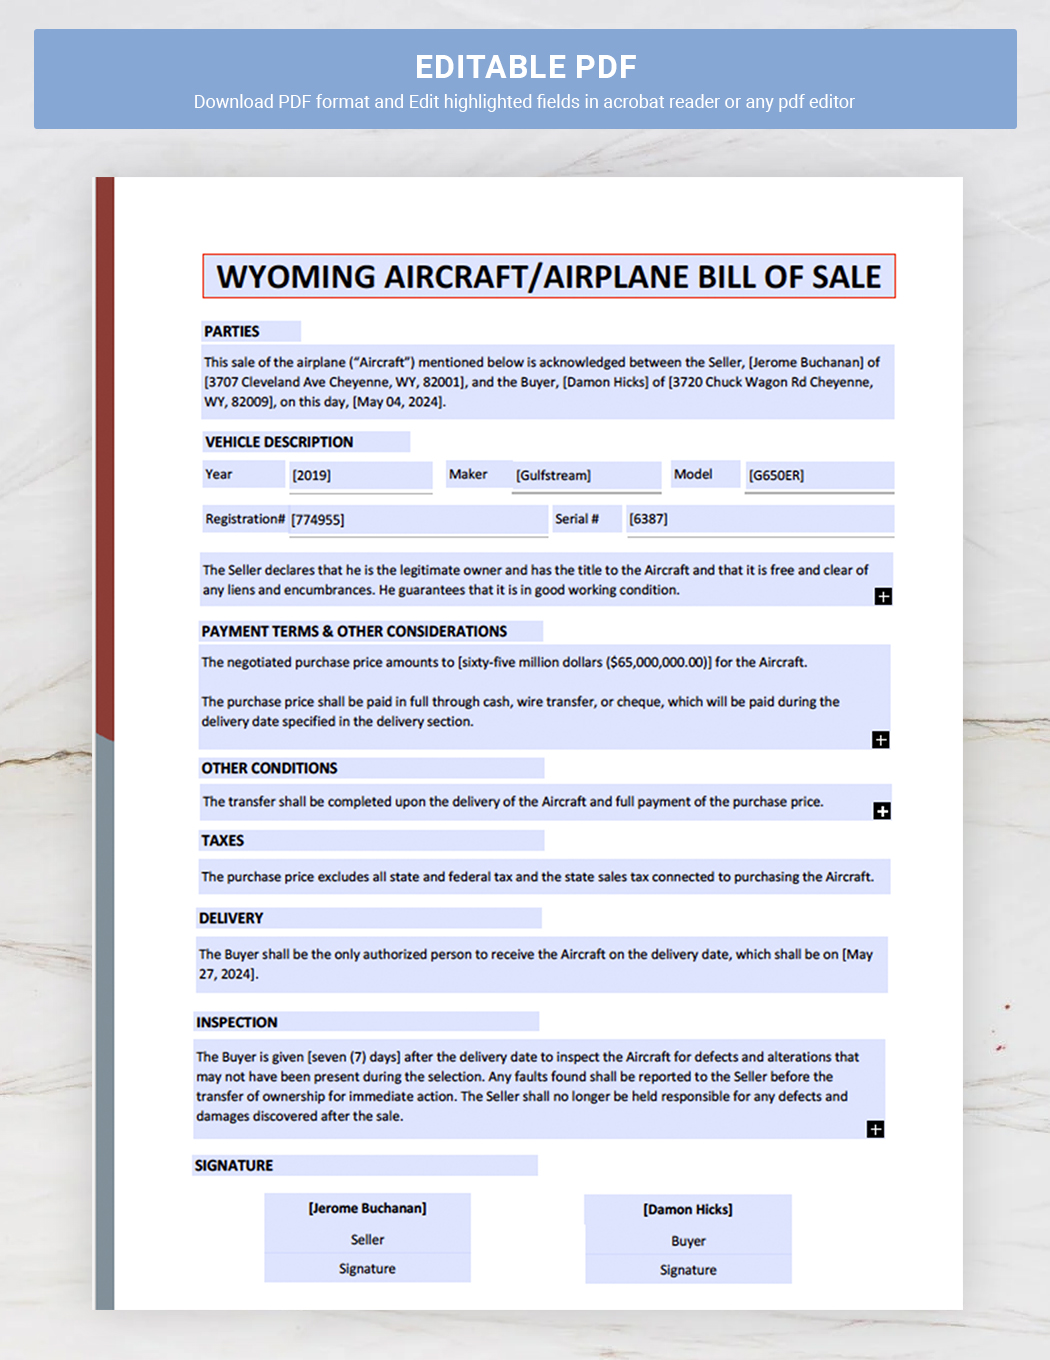 Wyoming Aircraft / Airplane Bill of Sale Template